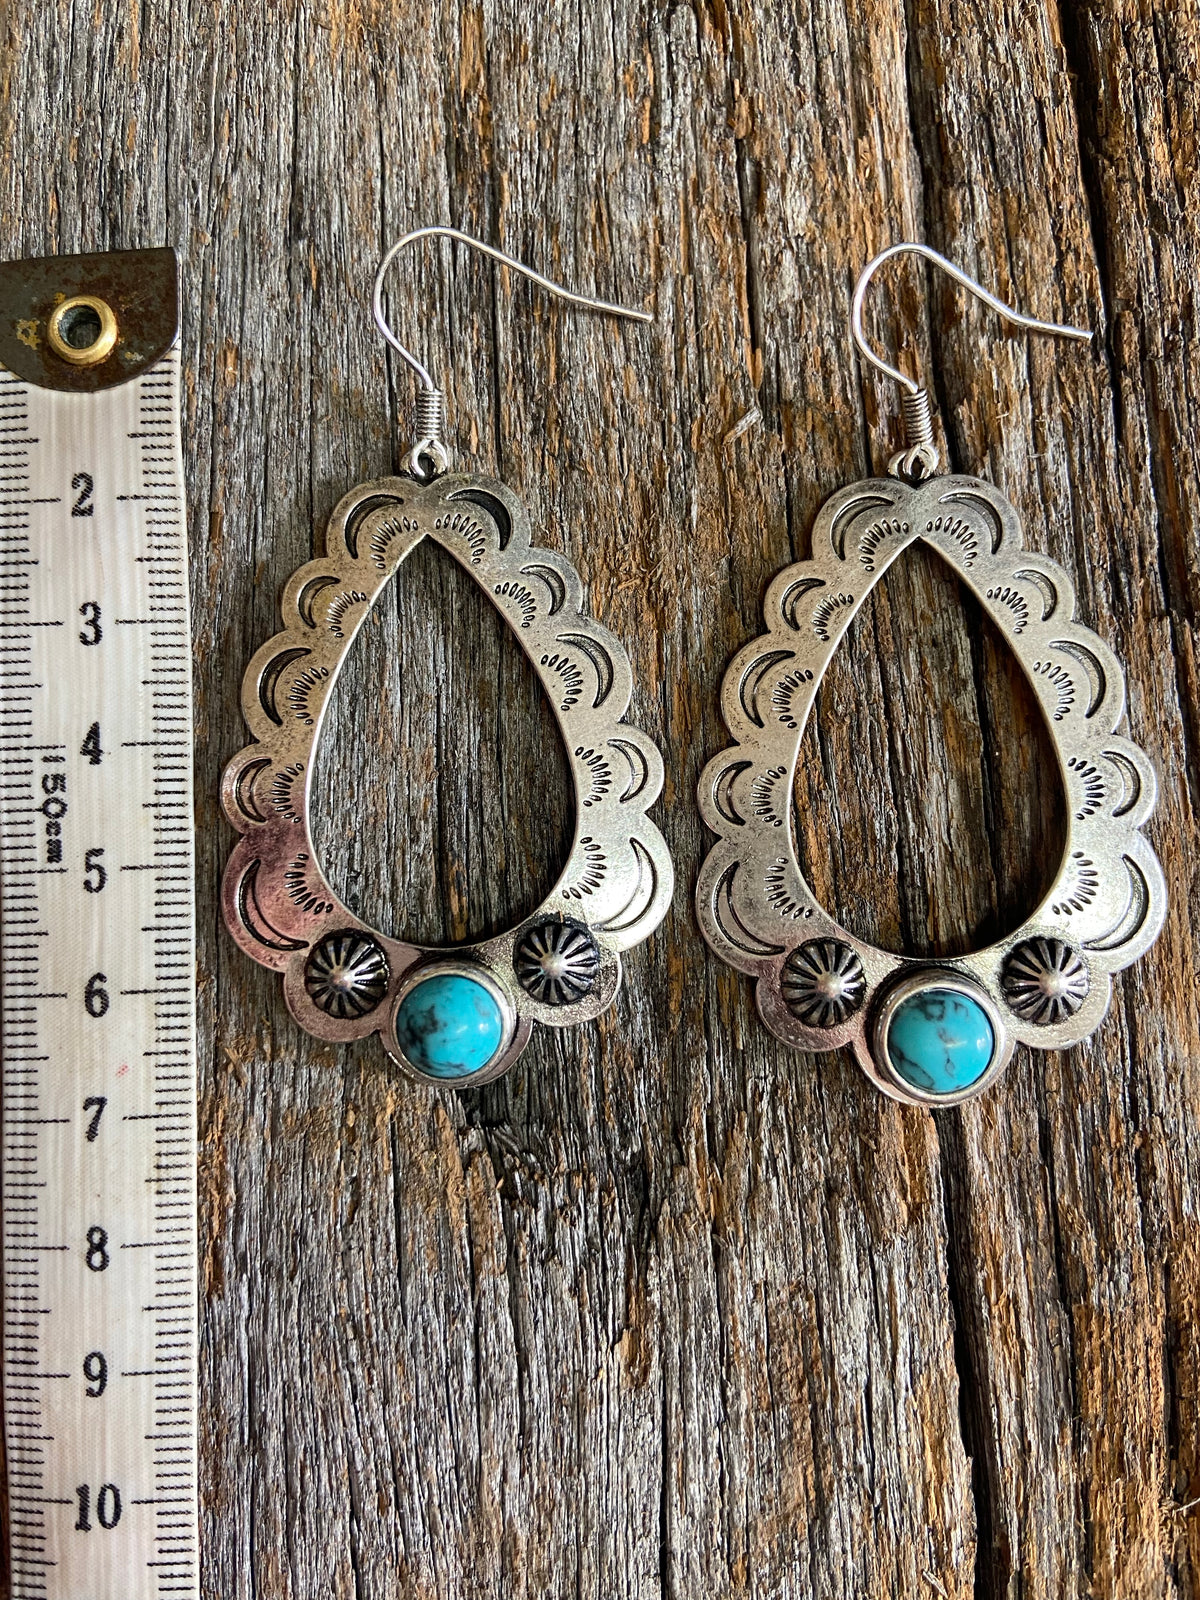 Western Earrings - Antique Silver and Turquoise Drop Hoop